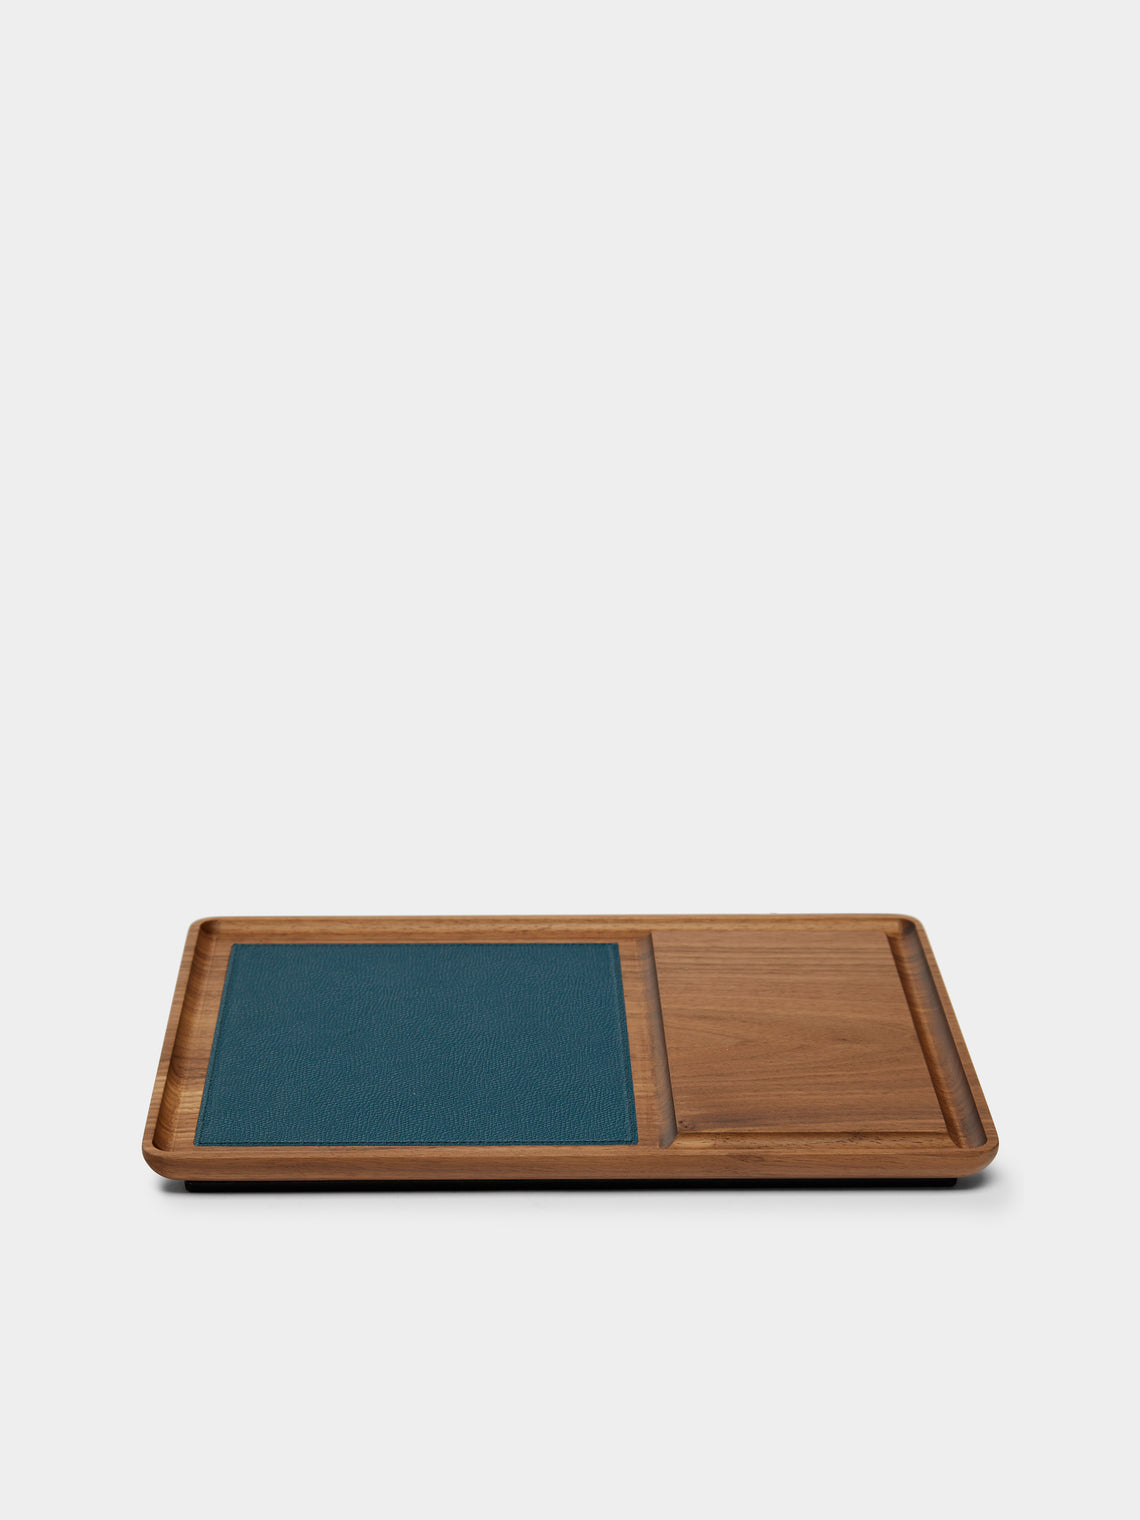 Giobagnara - Next Wood and Leather Wireless Charging Station - Brown - ABASK - 